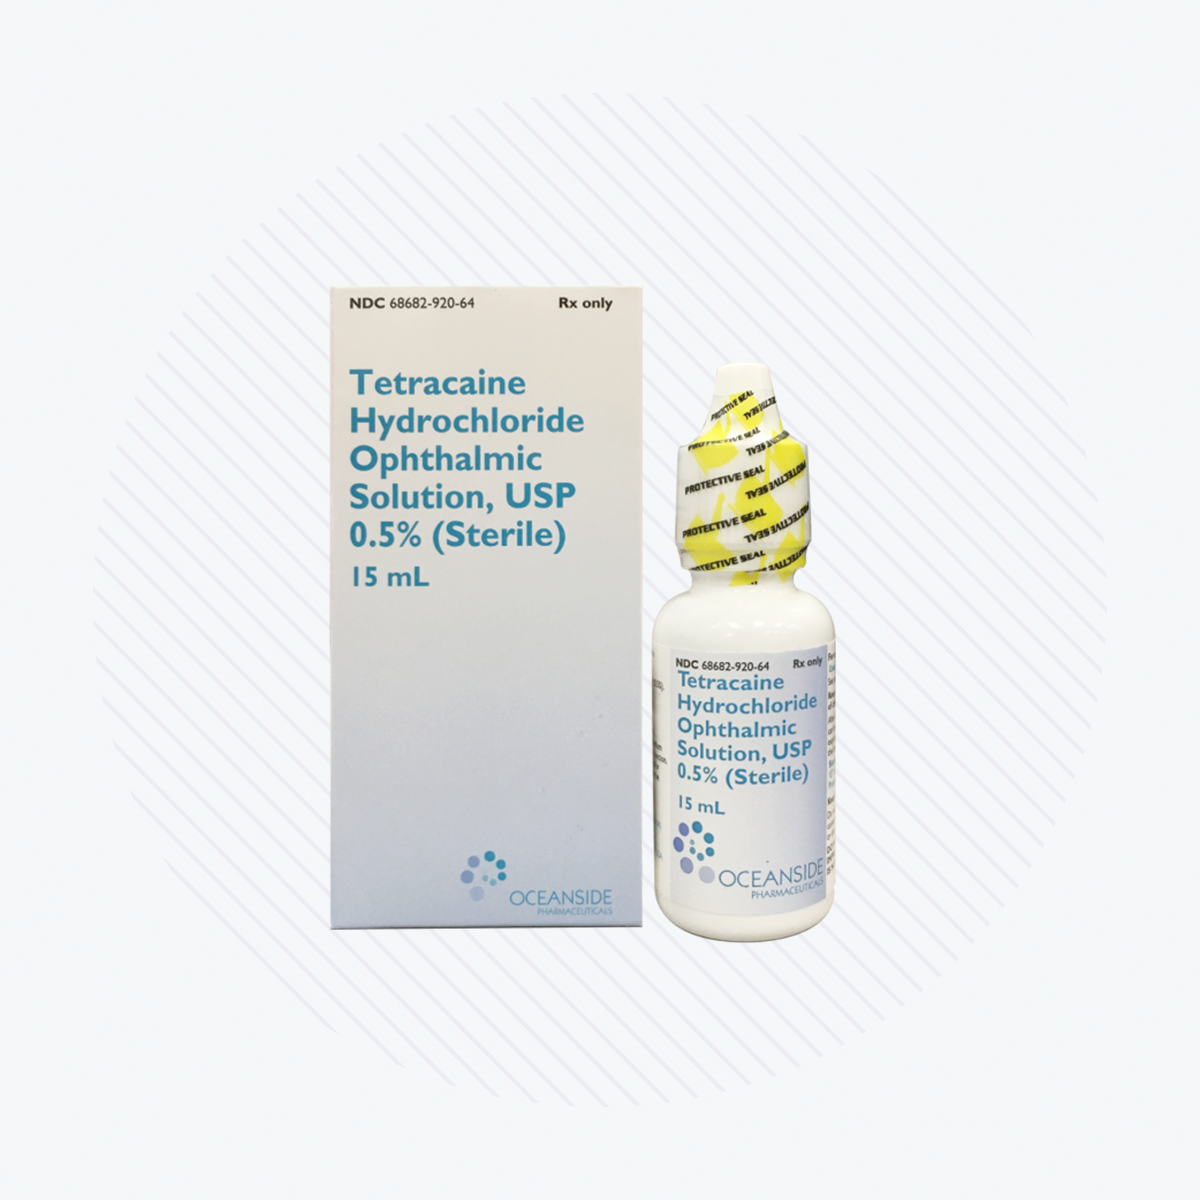 Tetracaine Eye Drops 0.5% Ophthalmic Solution - Bausch & Lomb